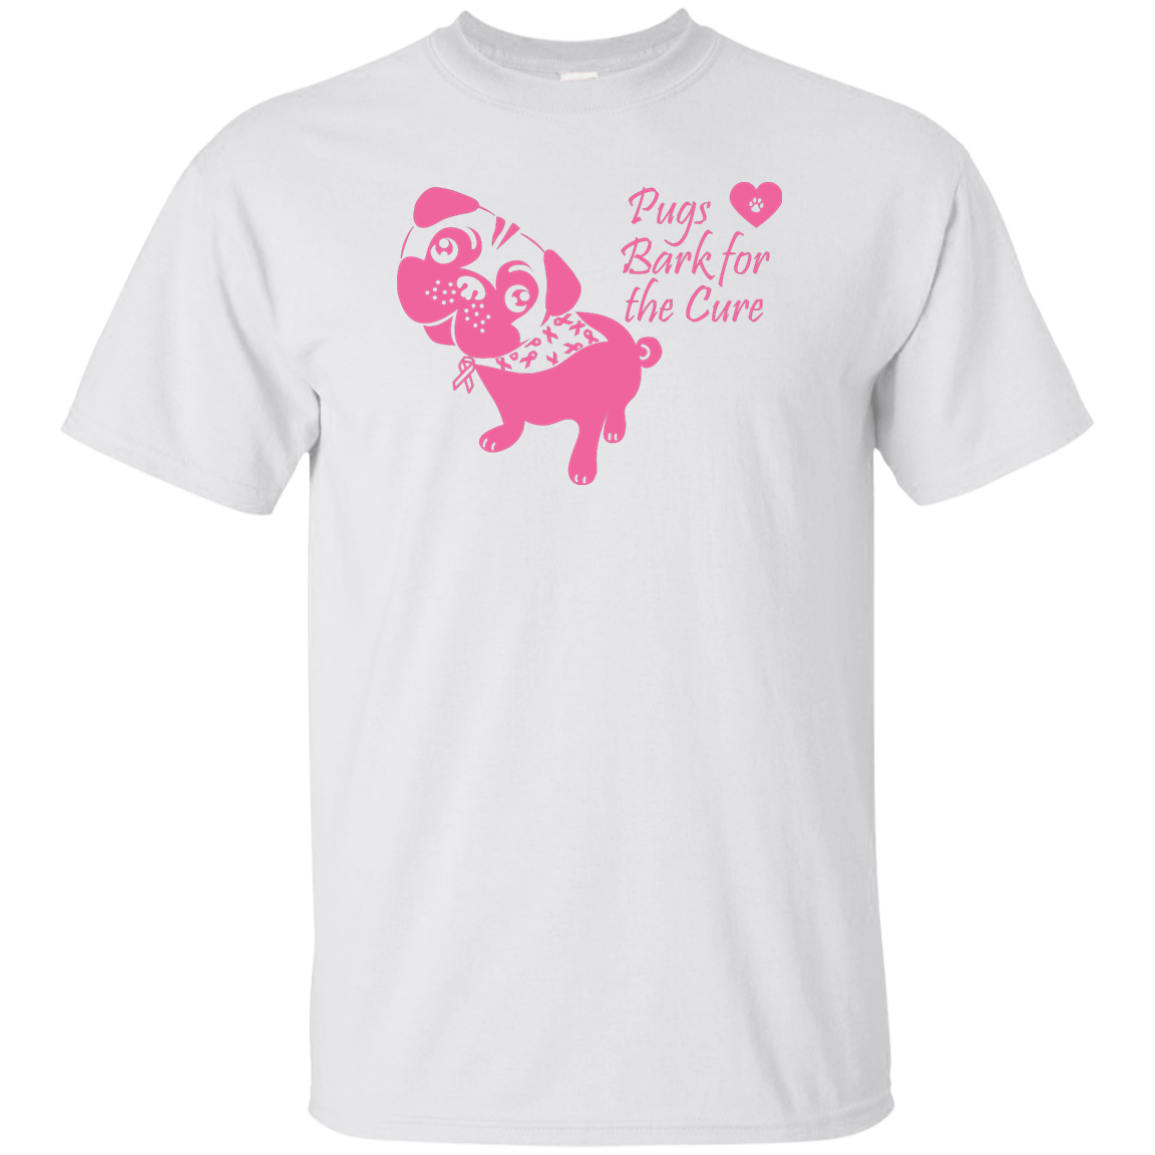 Pugs Bark for the Cure Shirts